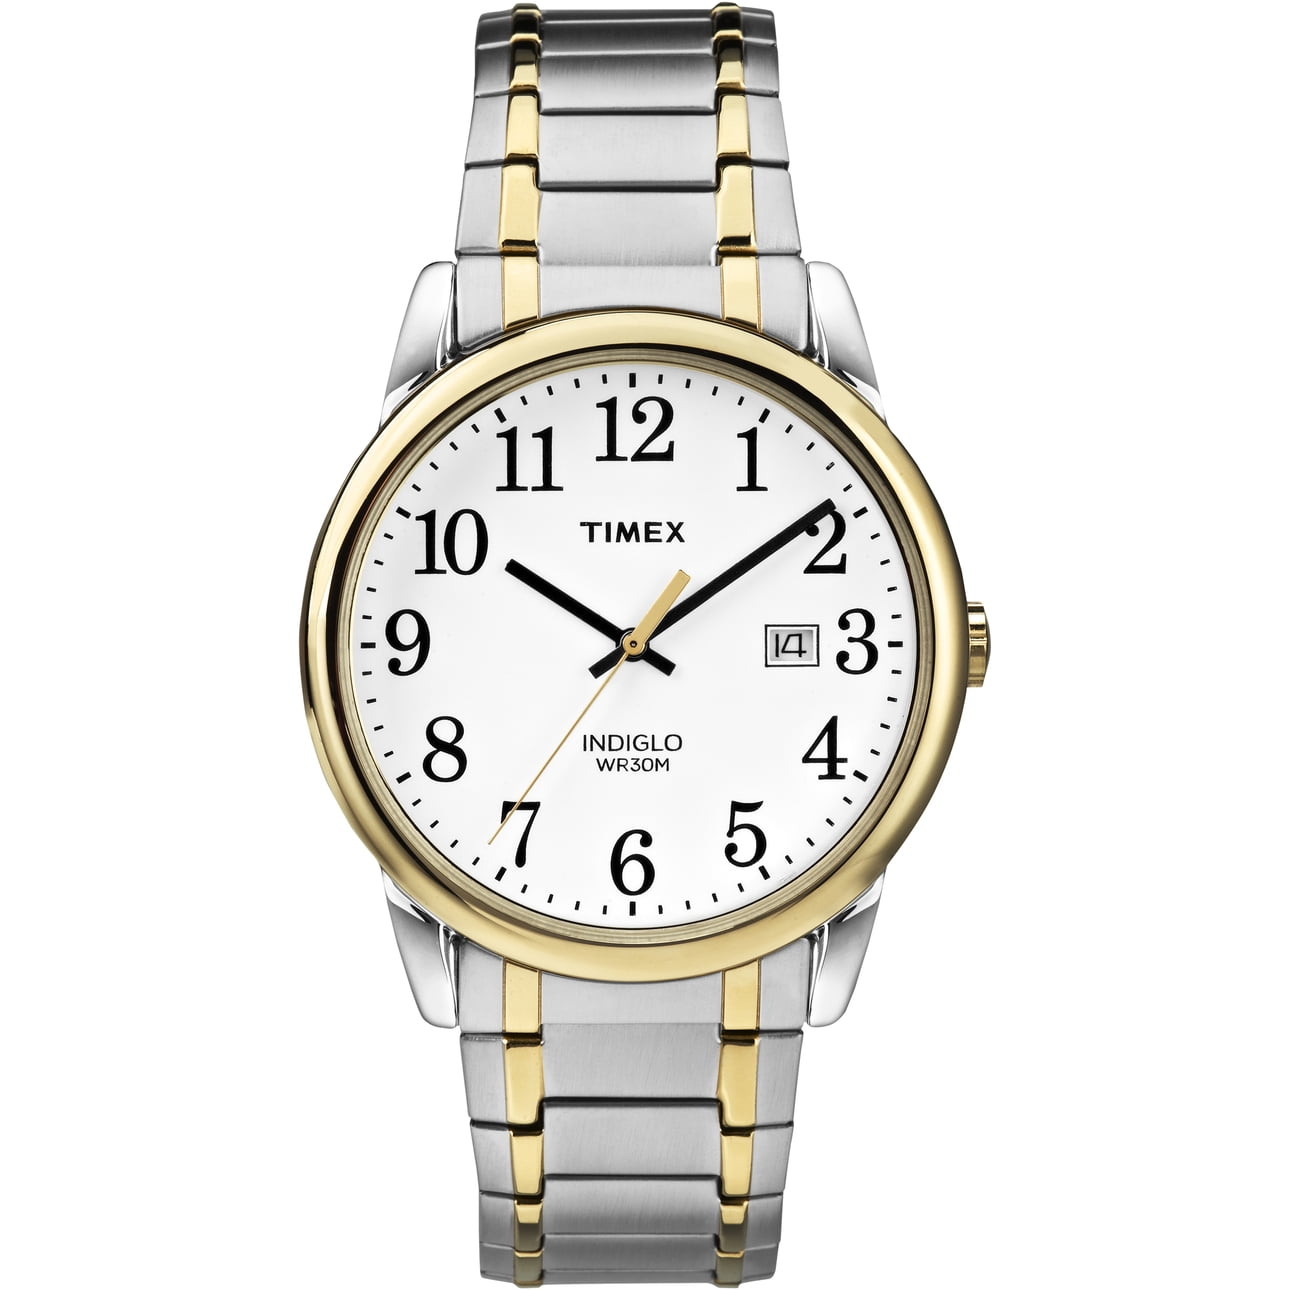 Timex Men's Easy Reader Date Two-Tone/White 38mm Casual Watch, Tapered Expansion Band